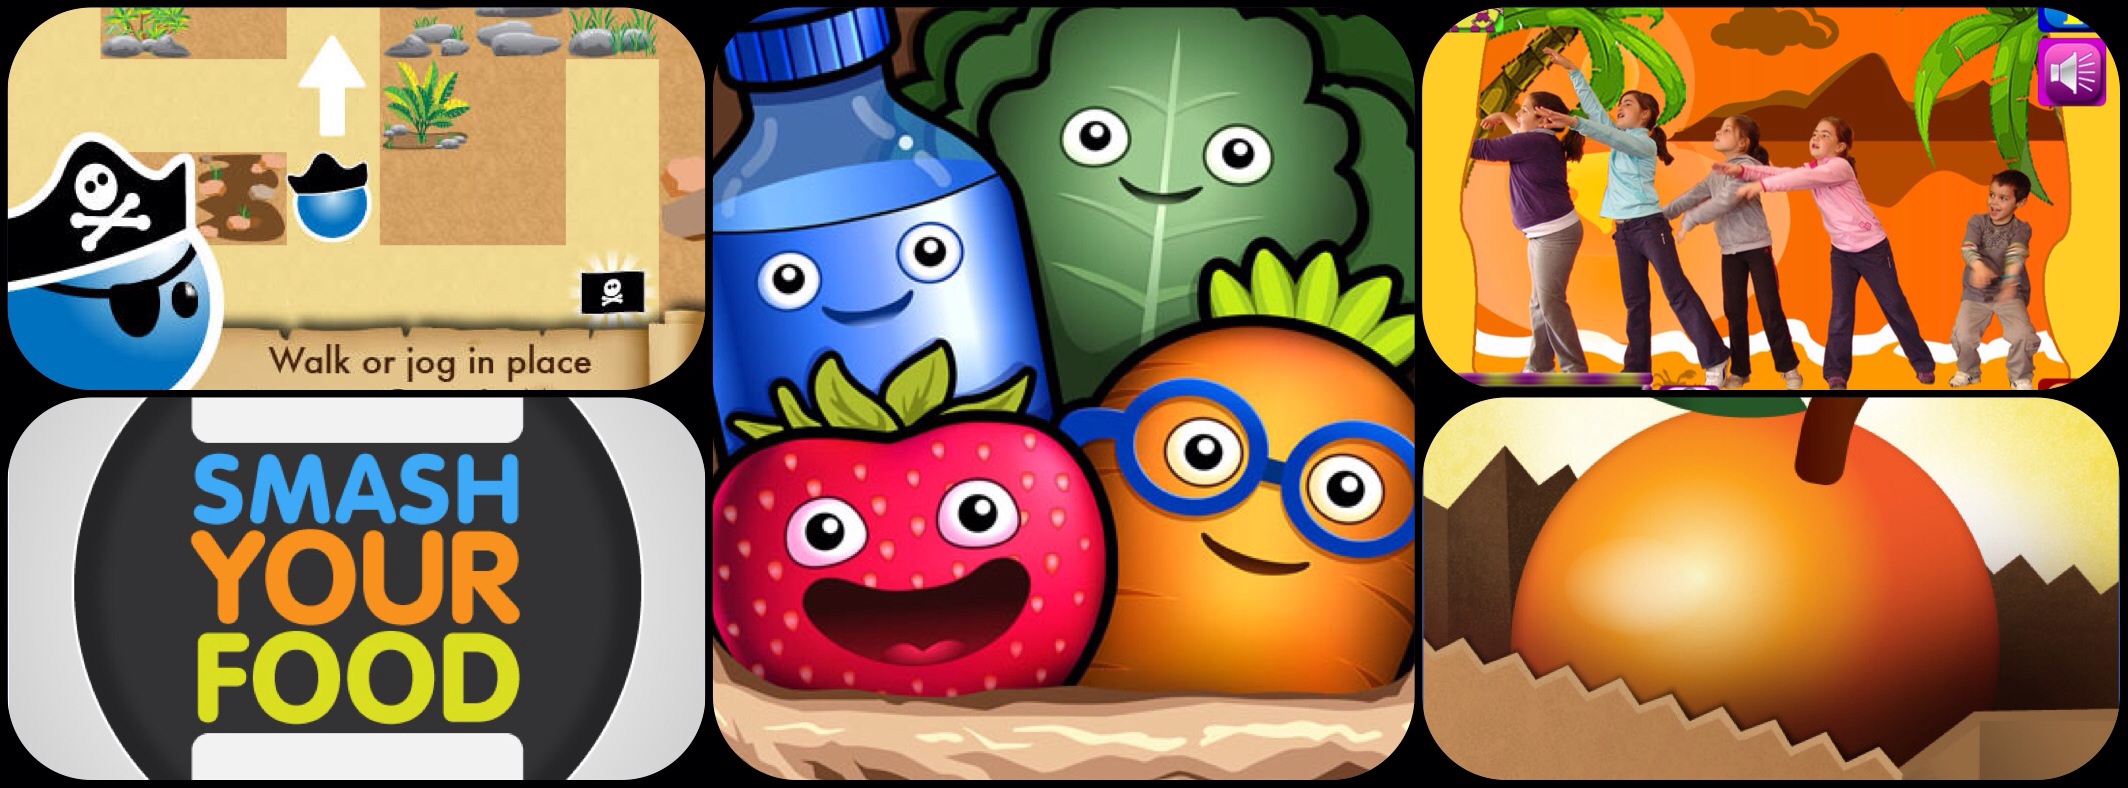 10 Best Health & Nutrition Education Apps for Kids